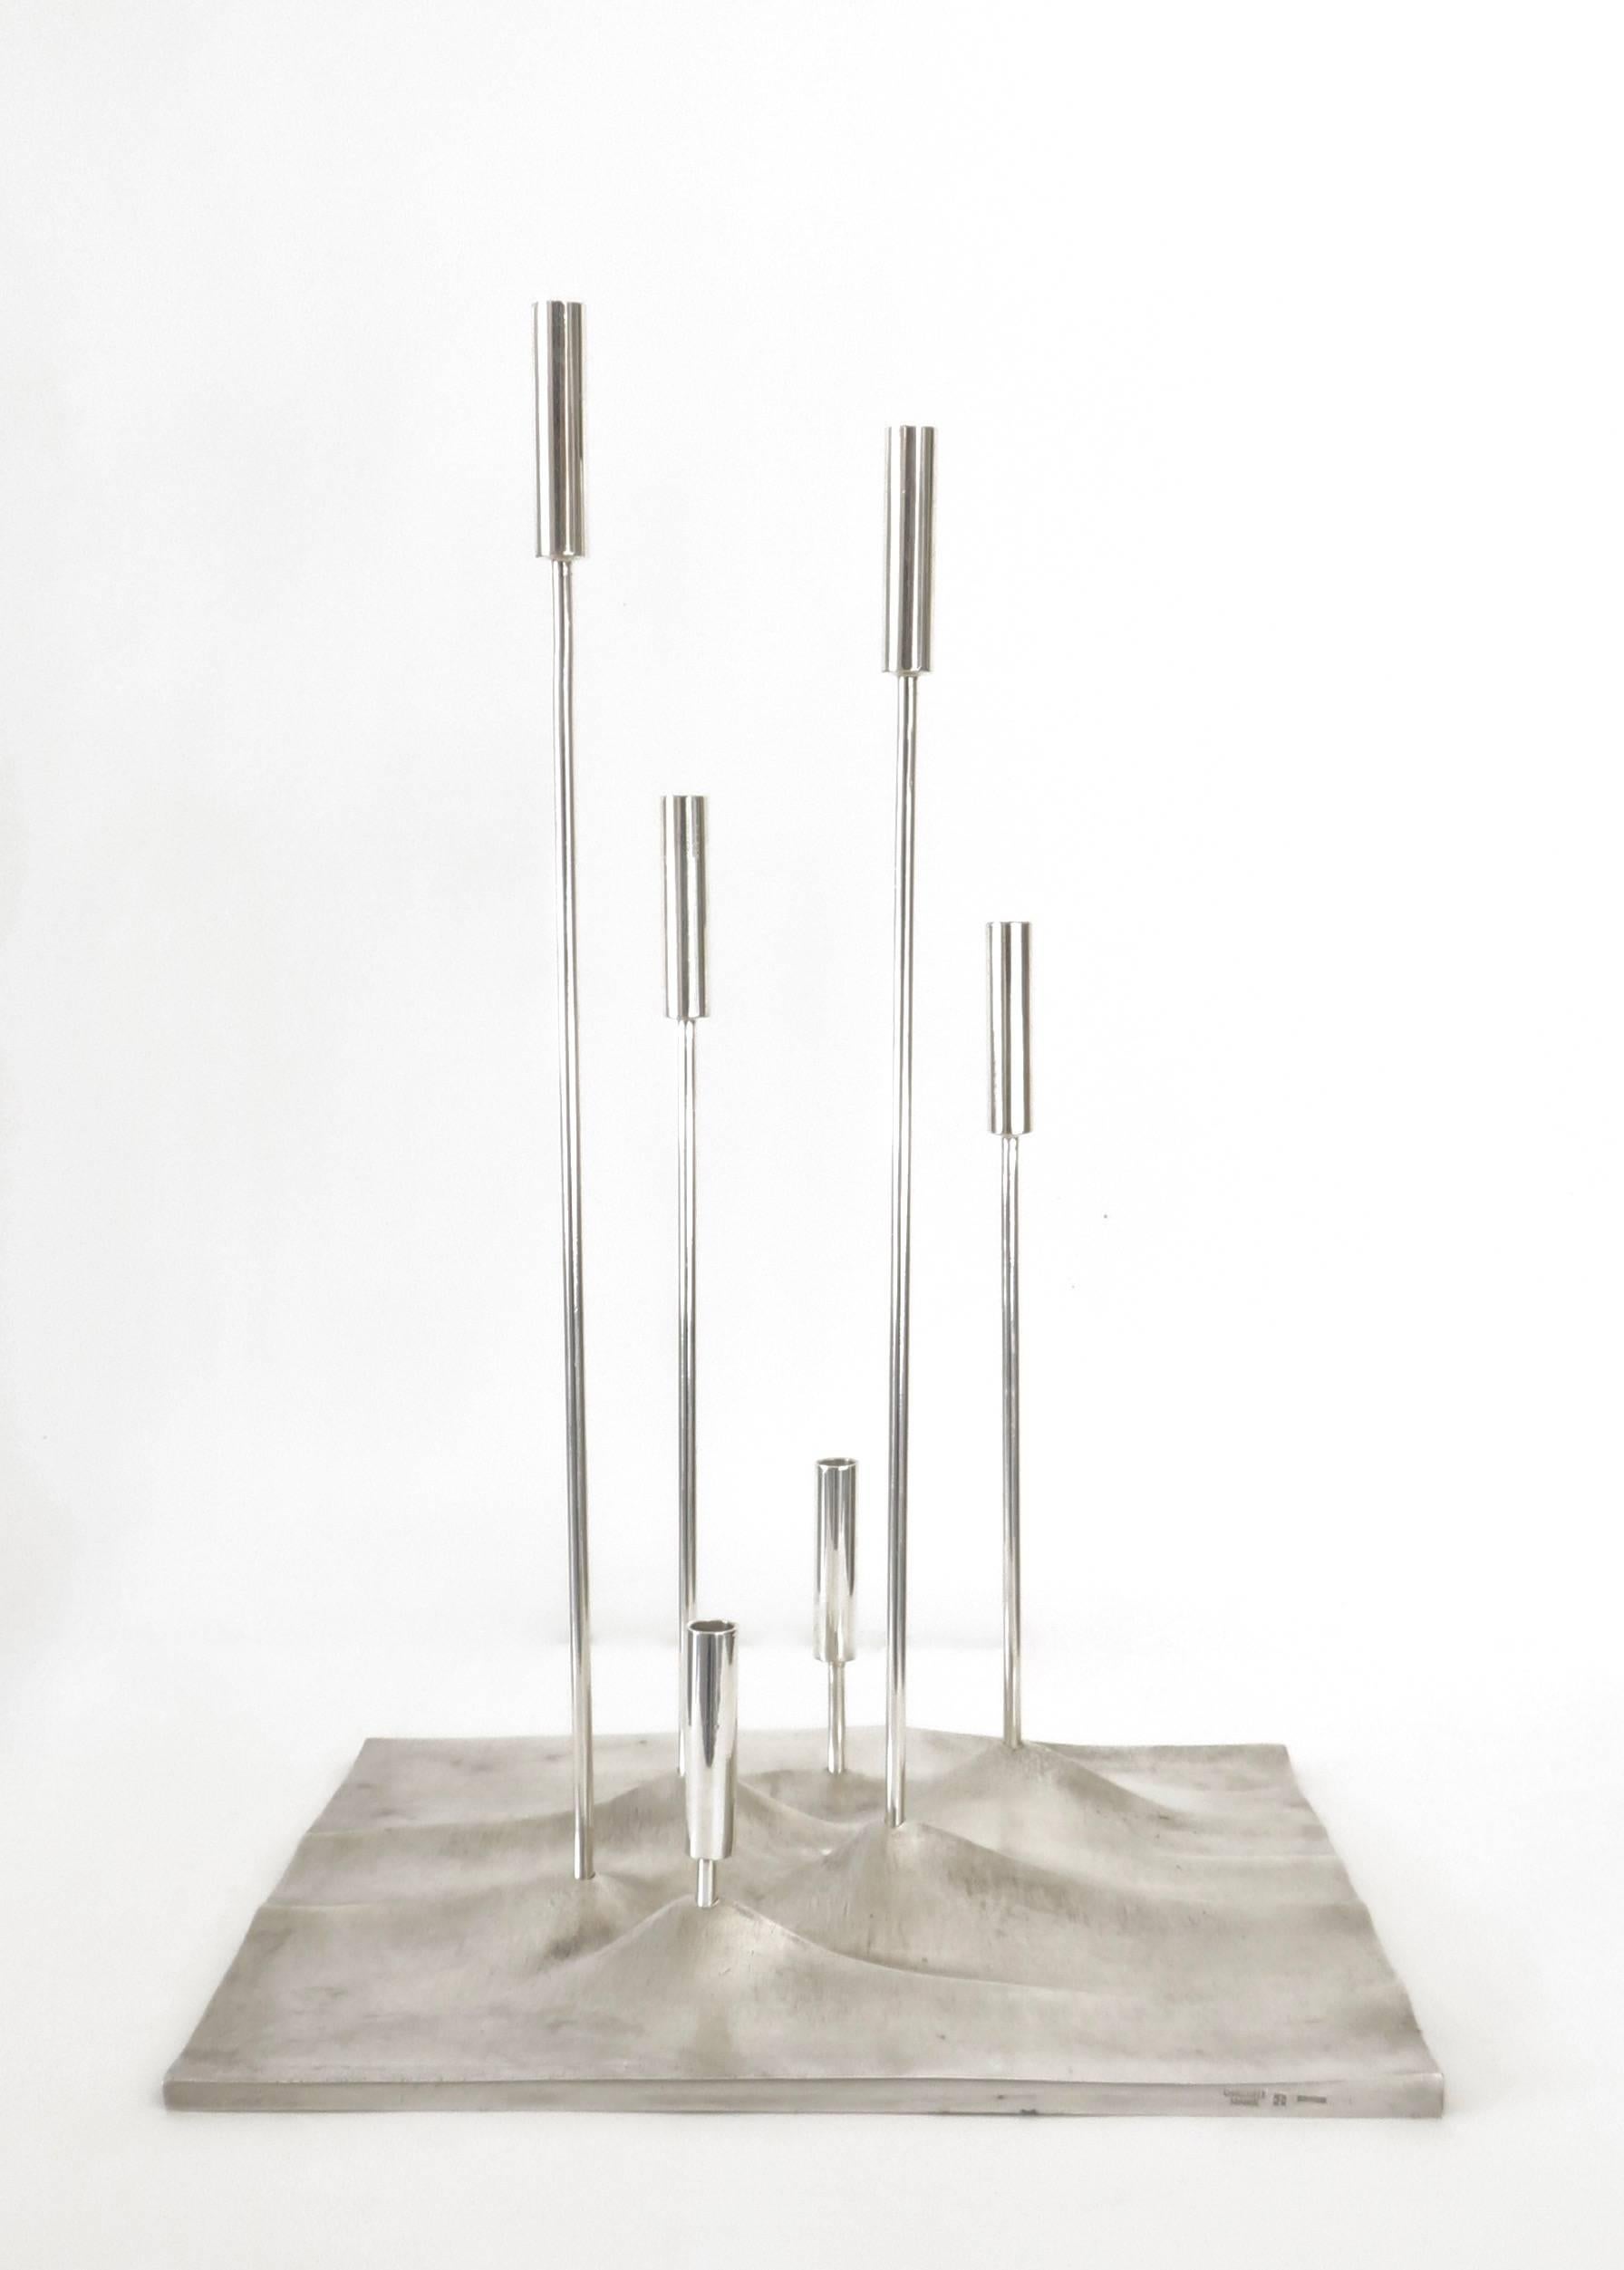 Designed in 1959 by the finnish designer Tapio Wirkkala, this candleholder was made by Christofle France.
Tapio Wirkkala designed this Candelabrum, 